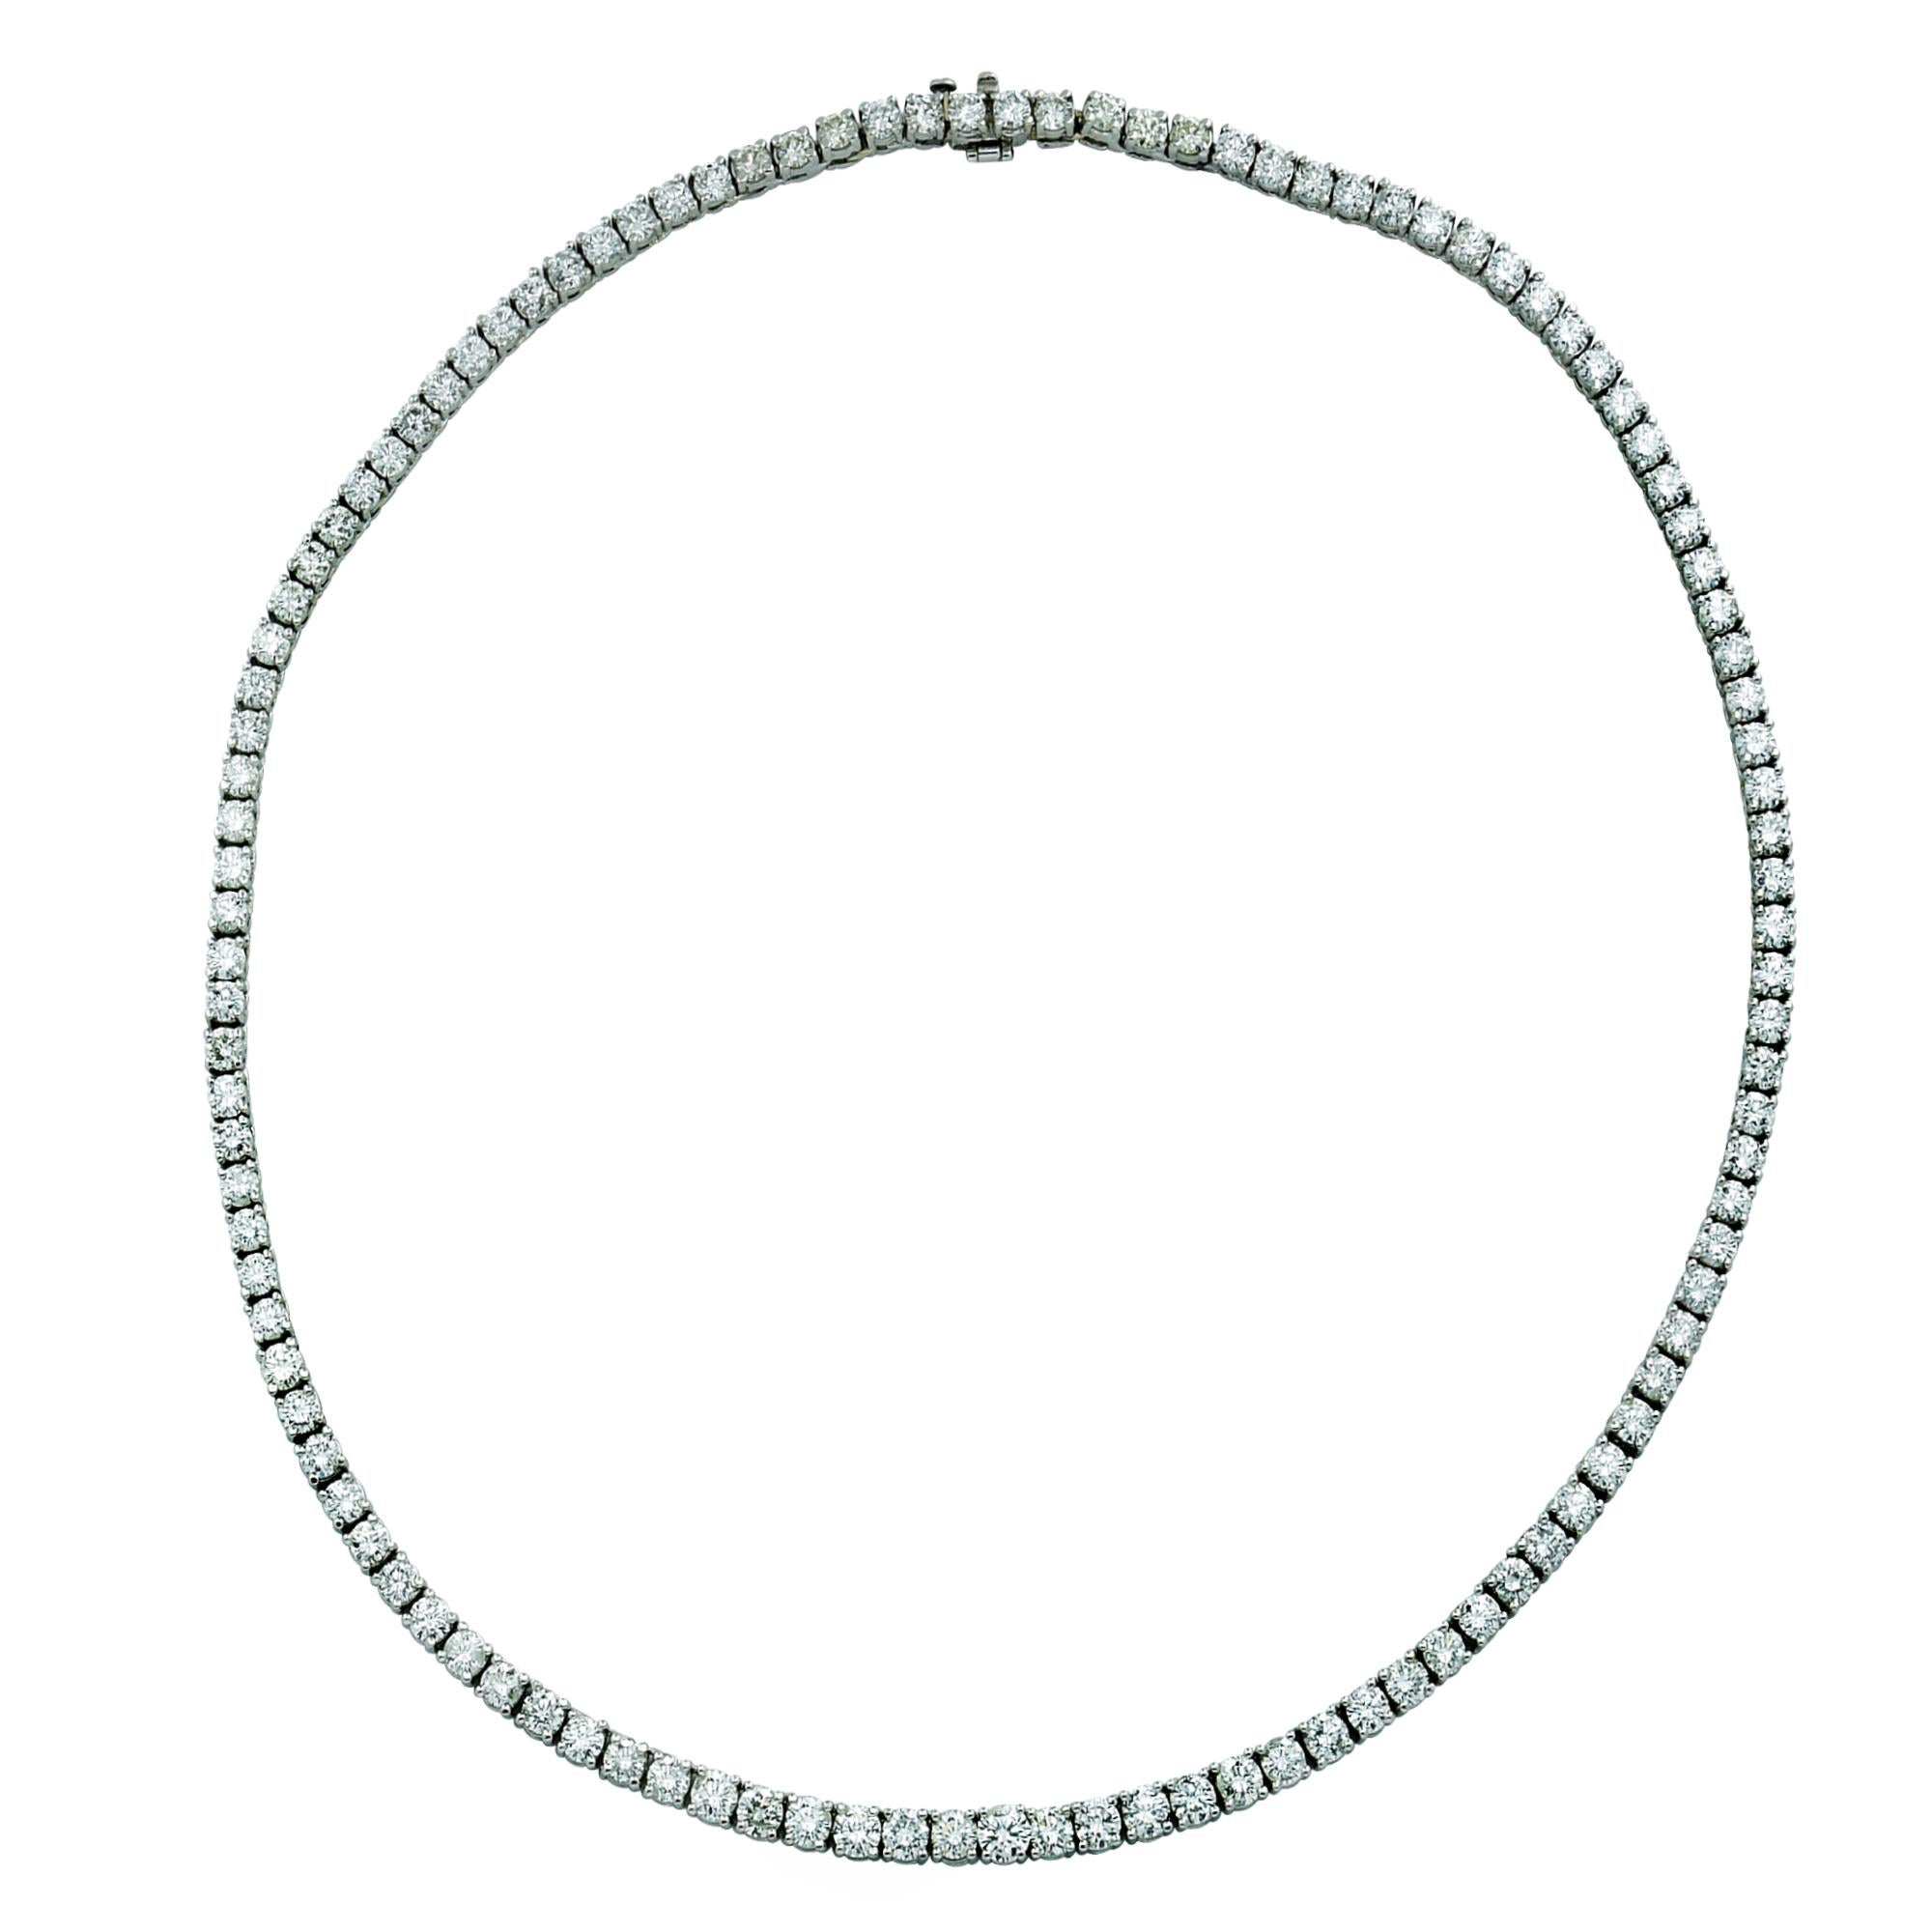 Exquisite Vivid Diamonds Straight Line diamond tennis necklace crafted in 18 karat White Gold, showcasing 152 round brilliant cut diamonds weighing 8.74 carats, F color, VS2 Clarity. Each diamond was carefully selected, perfectly matched and set in